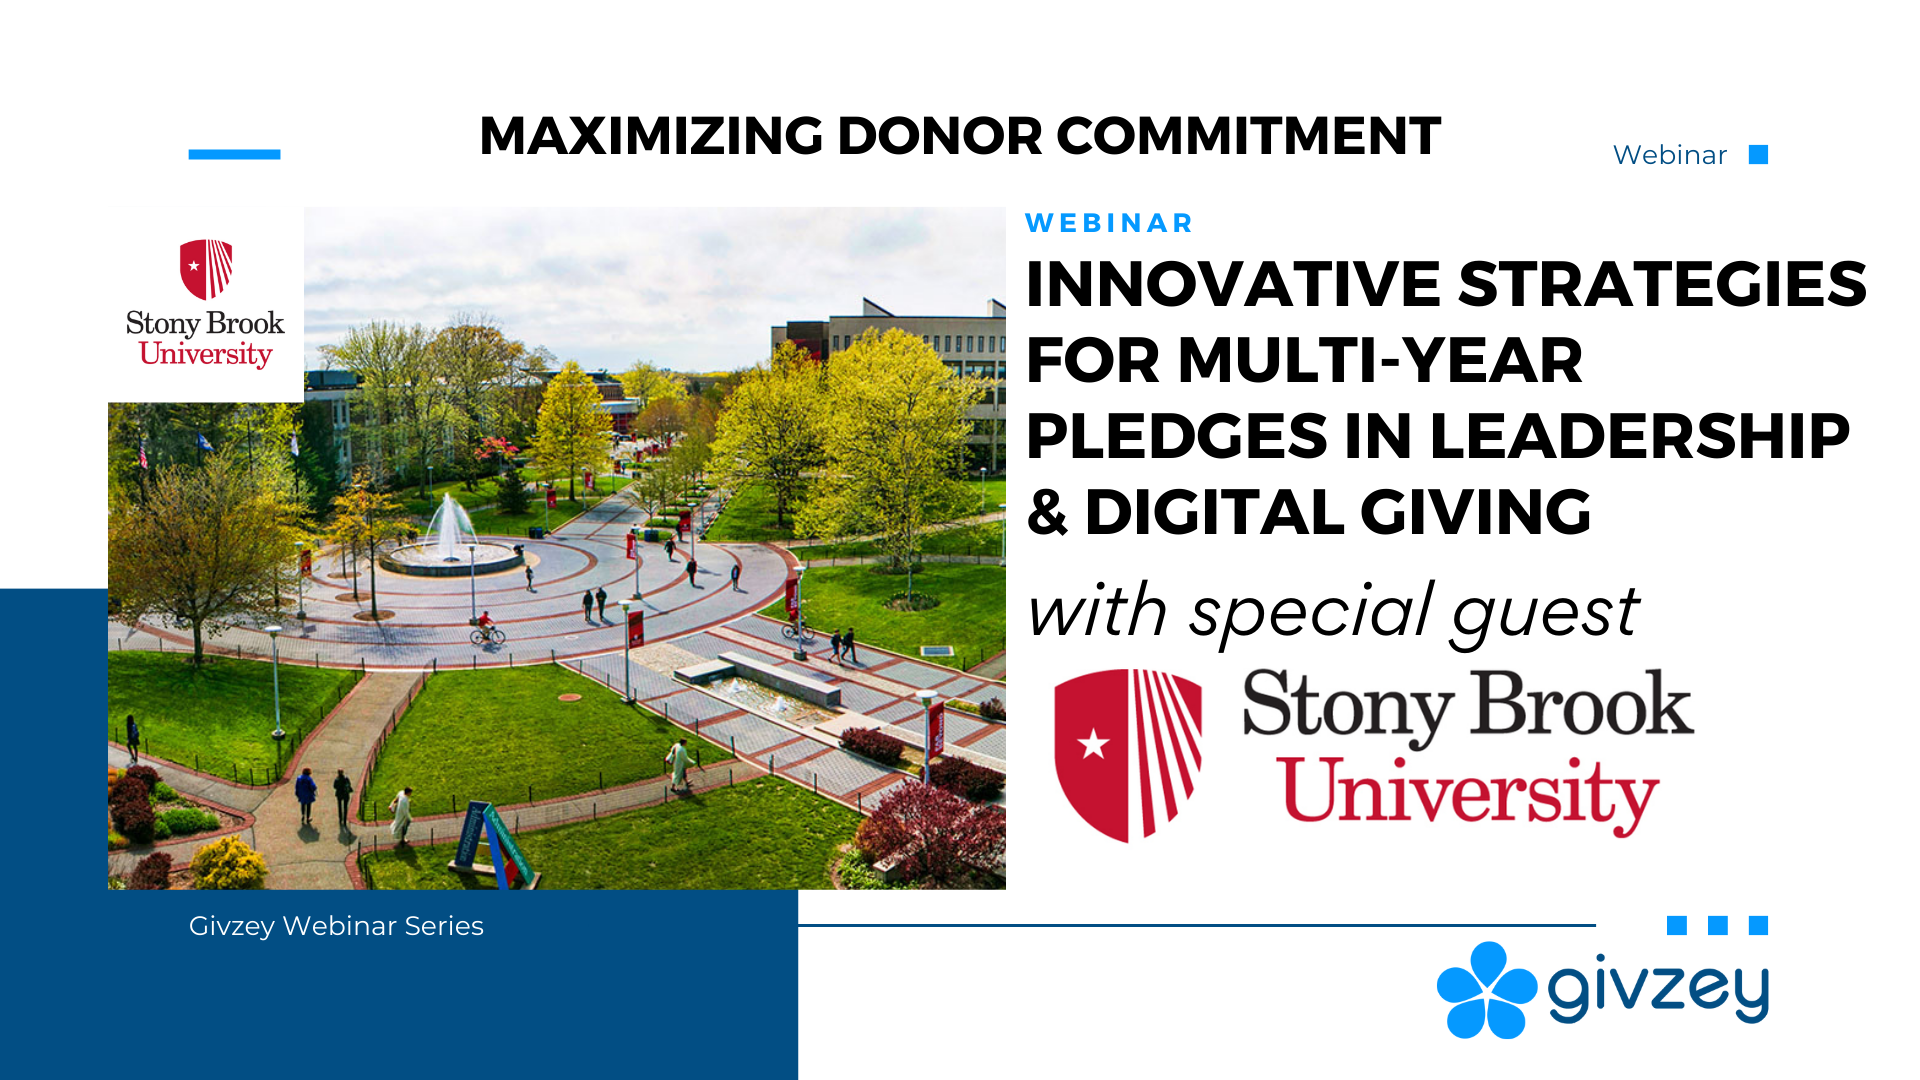 Maximizing Donor Commitment Innovative Strategies for Multi-Year Pledges in Leadership & Digital Giving